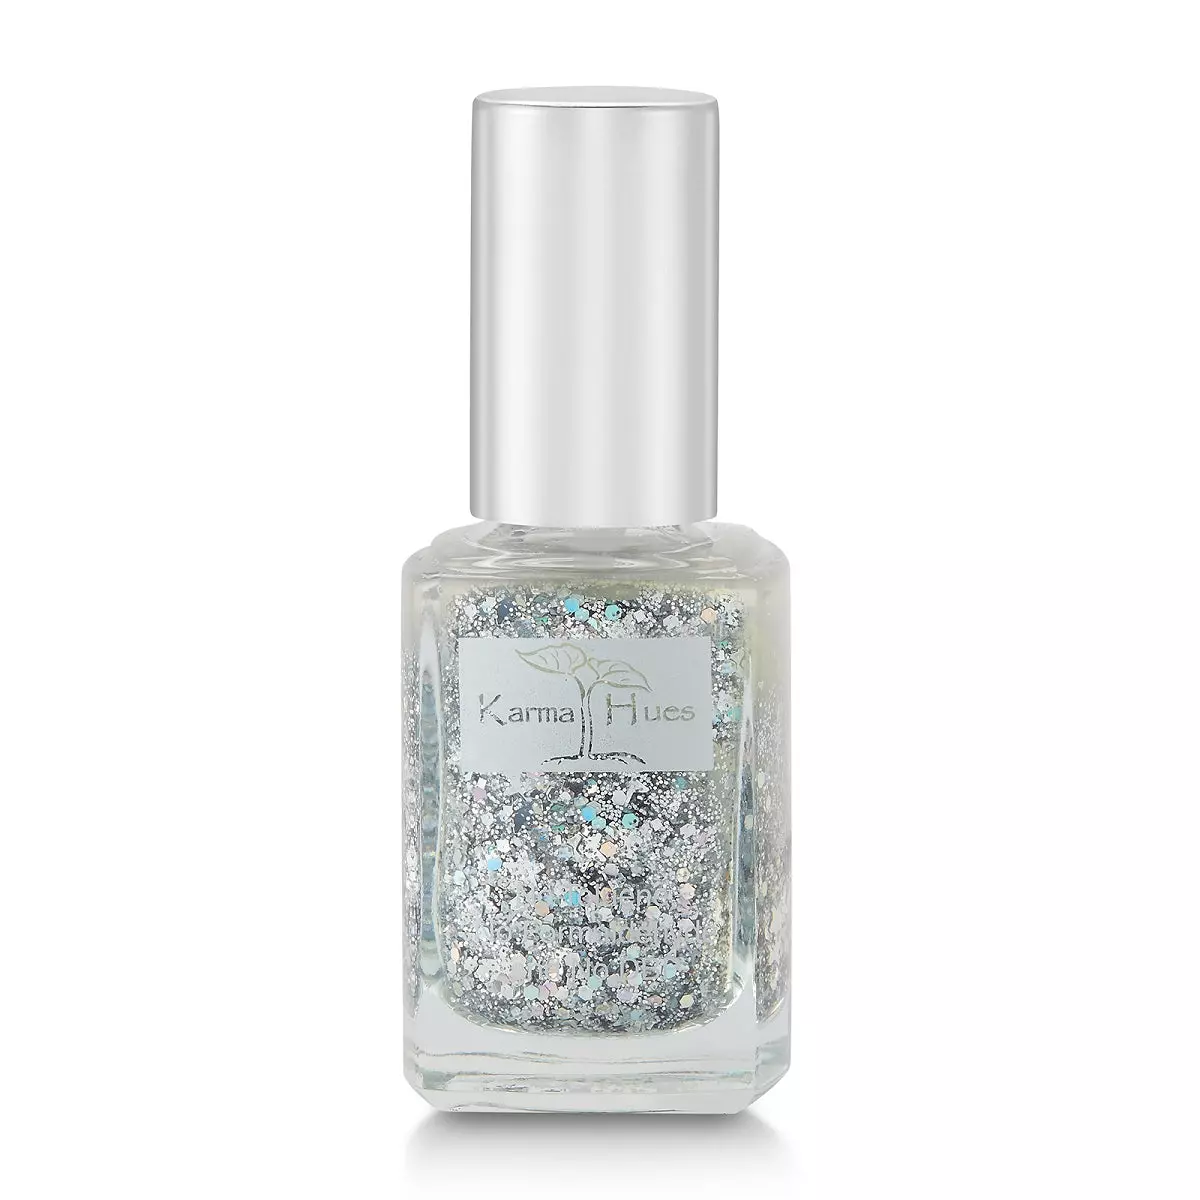 Karma Organic Nail Polish - Quick Dry Nail Lacquer, Non-Toxic, Vegan, and Cruelty-Free Nail Paint Art for Adults & Kids - No Toluene, No Formaldehyde, No DBP, and Free of TPHP (Glitter Bomb, 0.43 fl oz.)